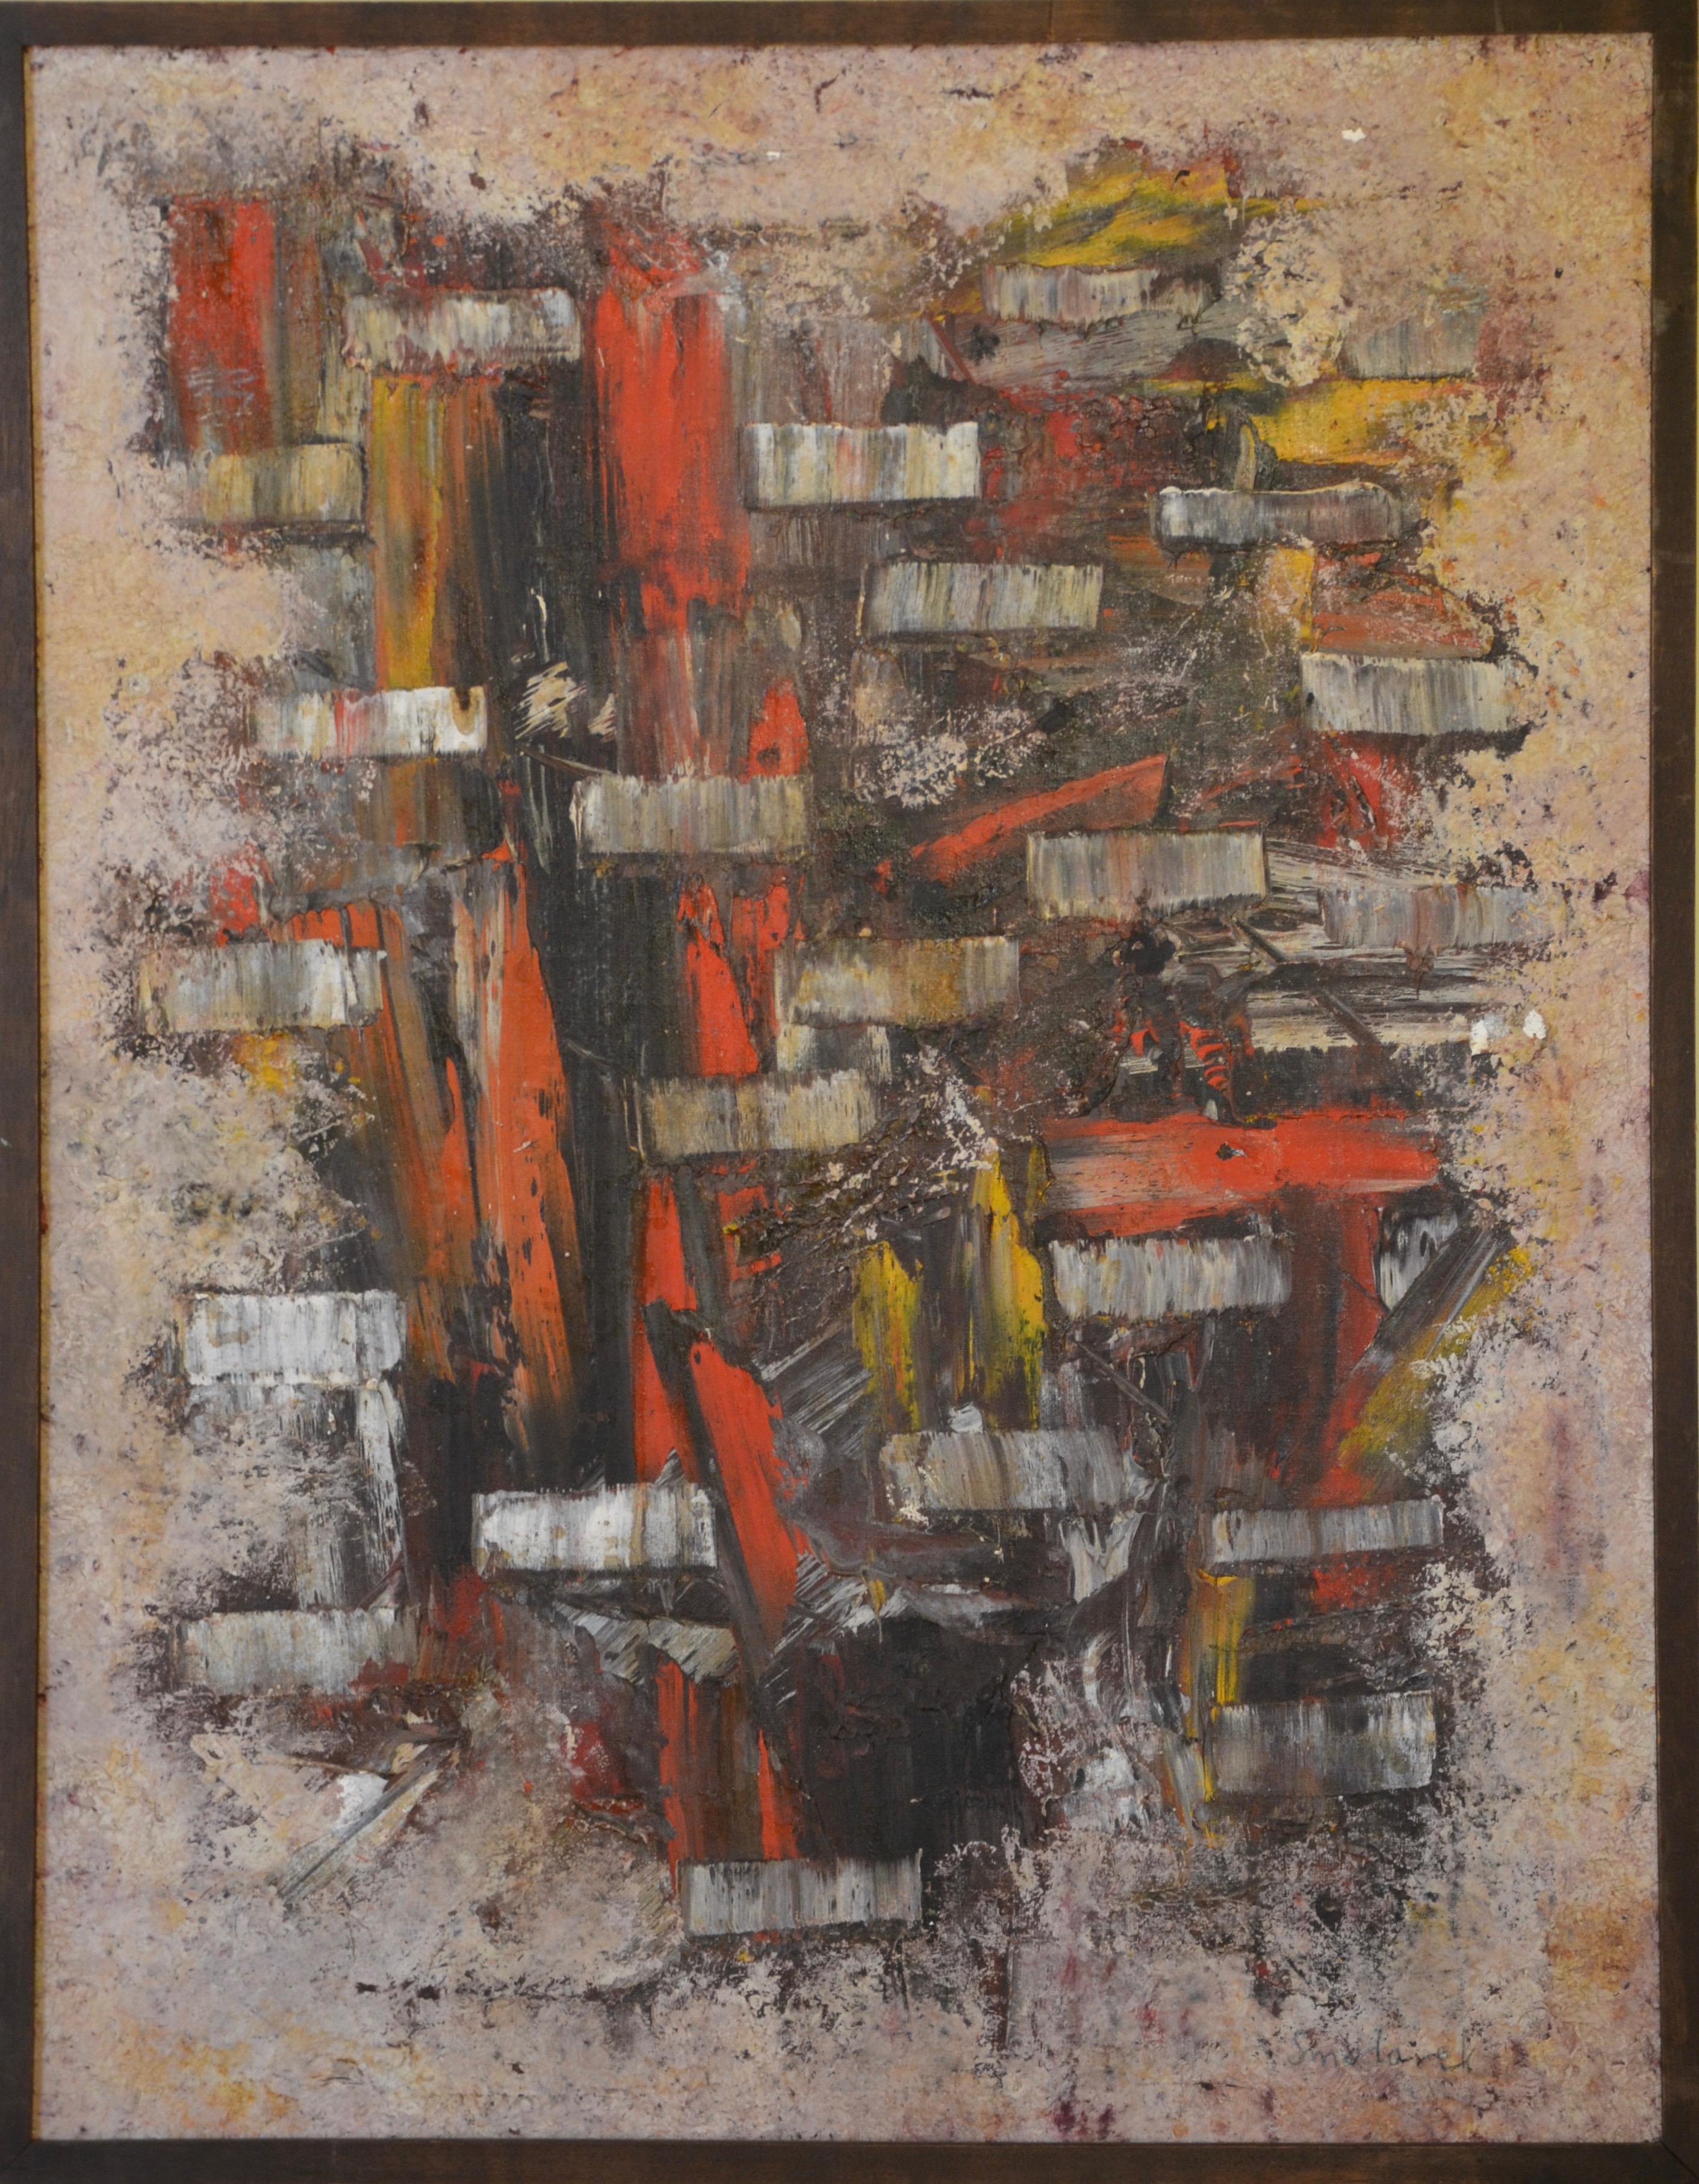 Untitled  (Abstract Cubist Composition in Red, White, Brown & Black) - Painting by Waldemar Smolarek